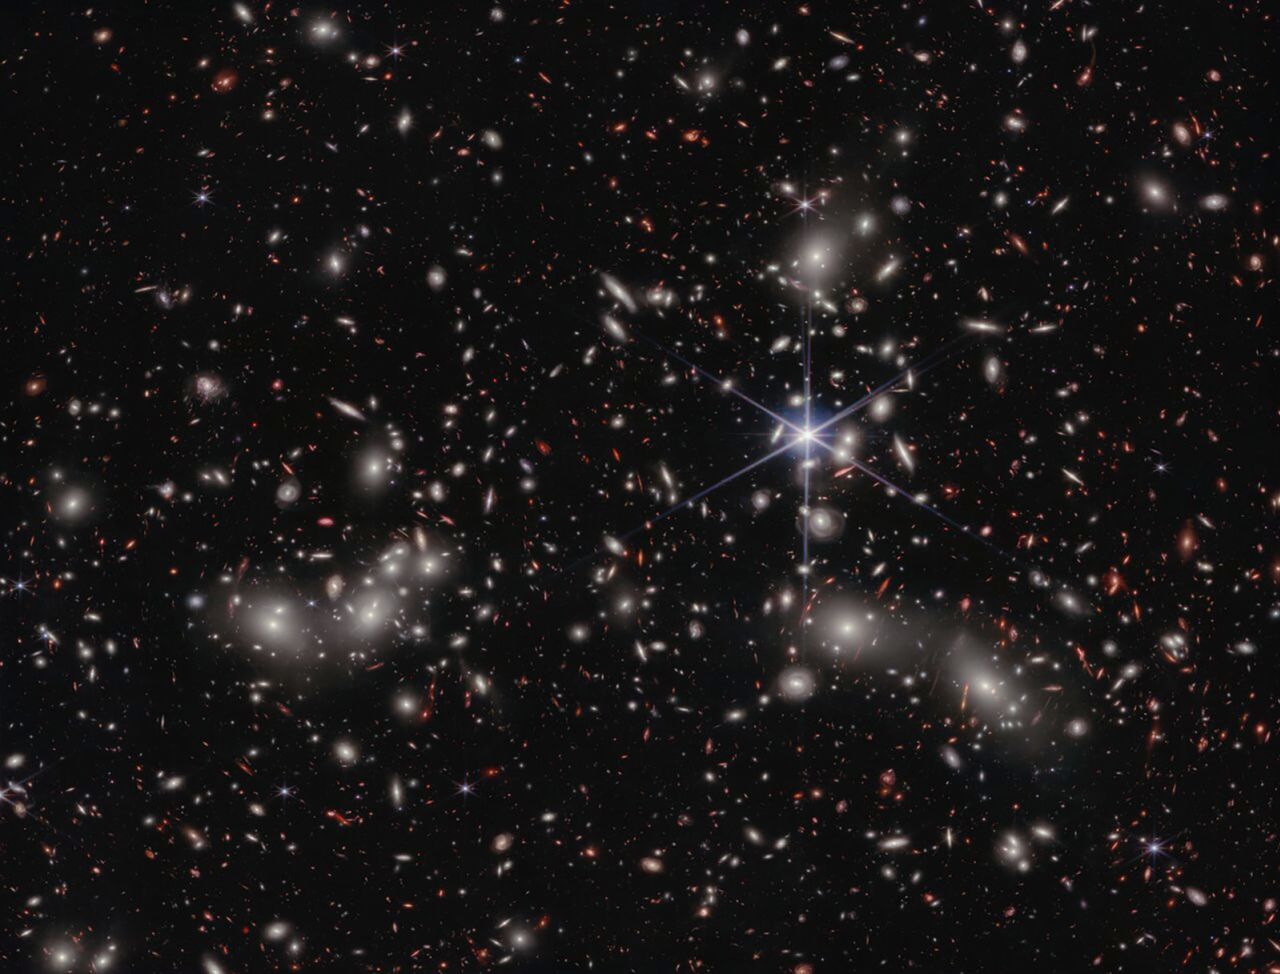 The James Webb Space Telescope captured 50,000 sources of near-infrared light in a new image of Pandora's Cluster, a megacluster of galaxies. The cluster acts like a magnifying glass, allowing astronomers to see more distant galaxies behind it.